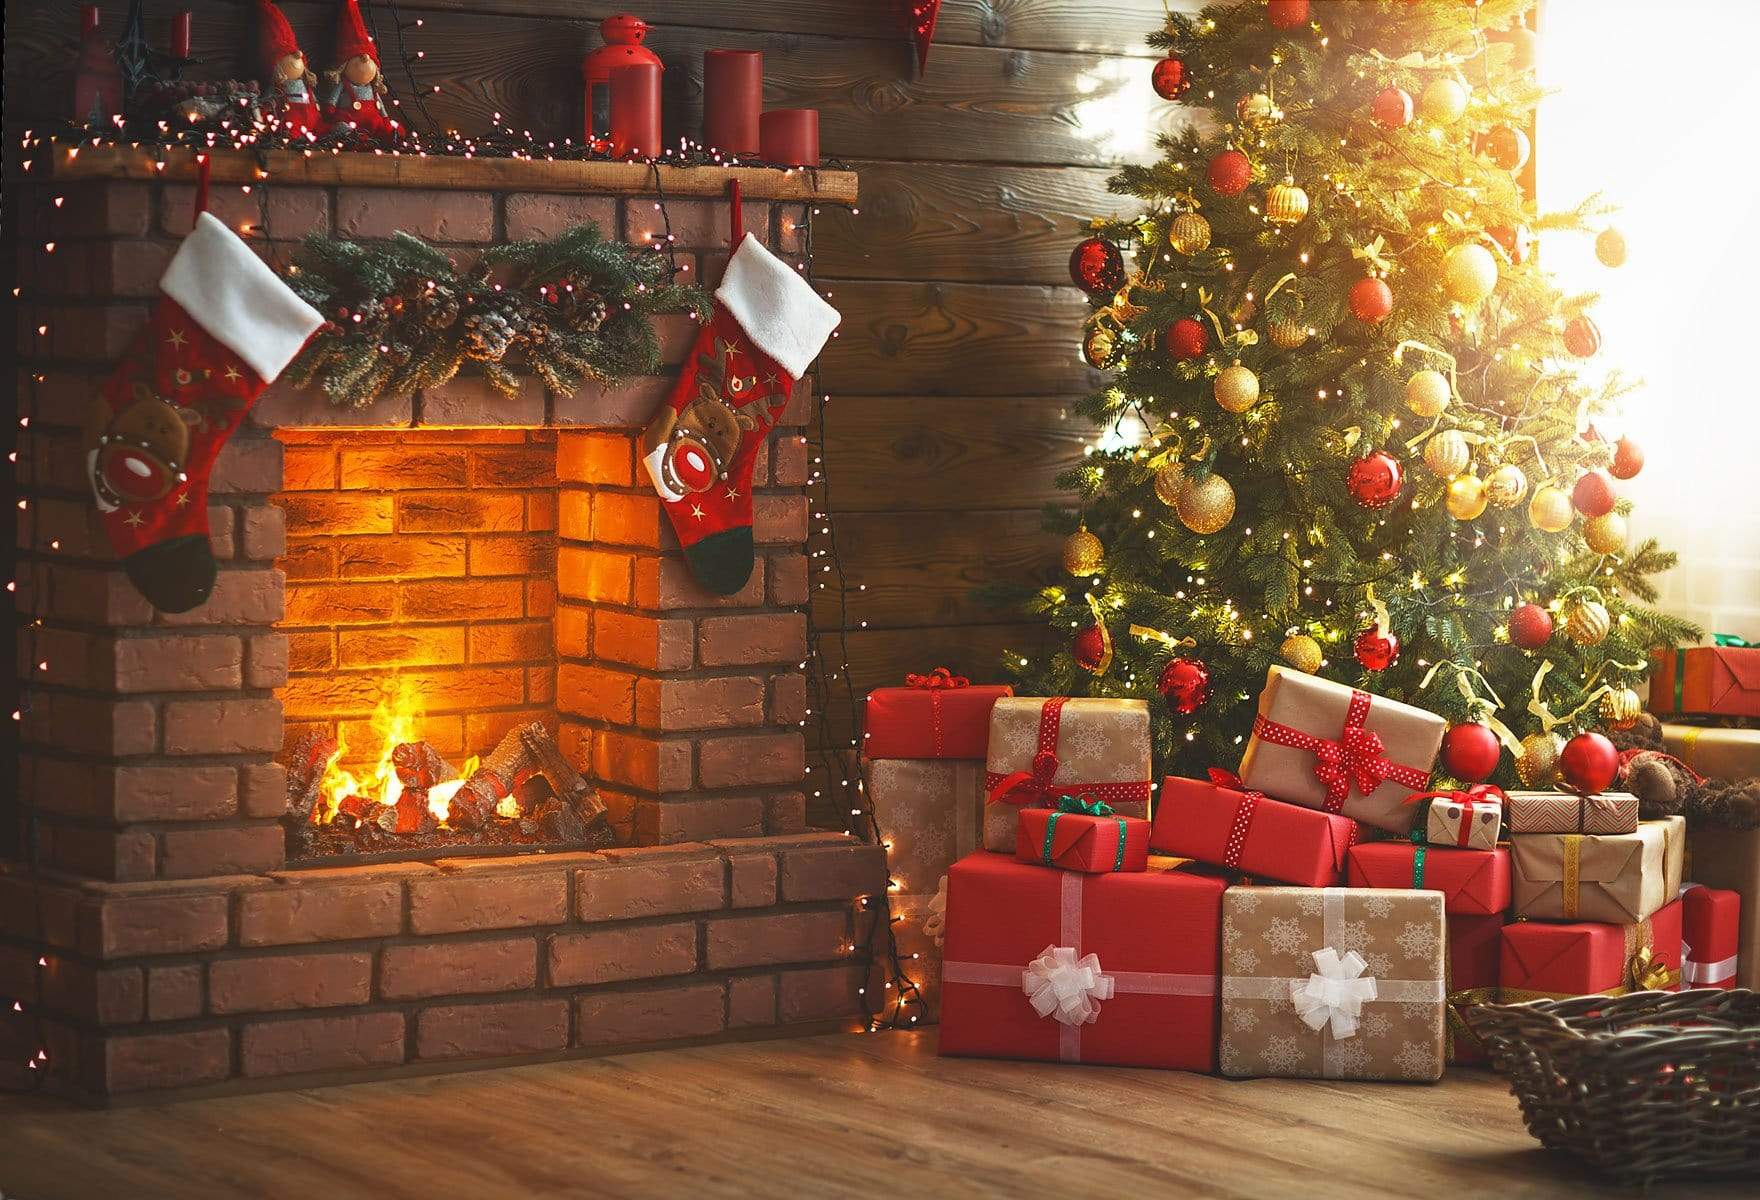 Katebackdrop鎷㈡綖Kate Winter Christmas trees  Fireplace  Stockings  Christmas Gifts for Pictures